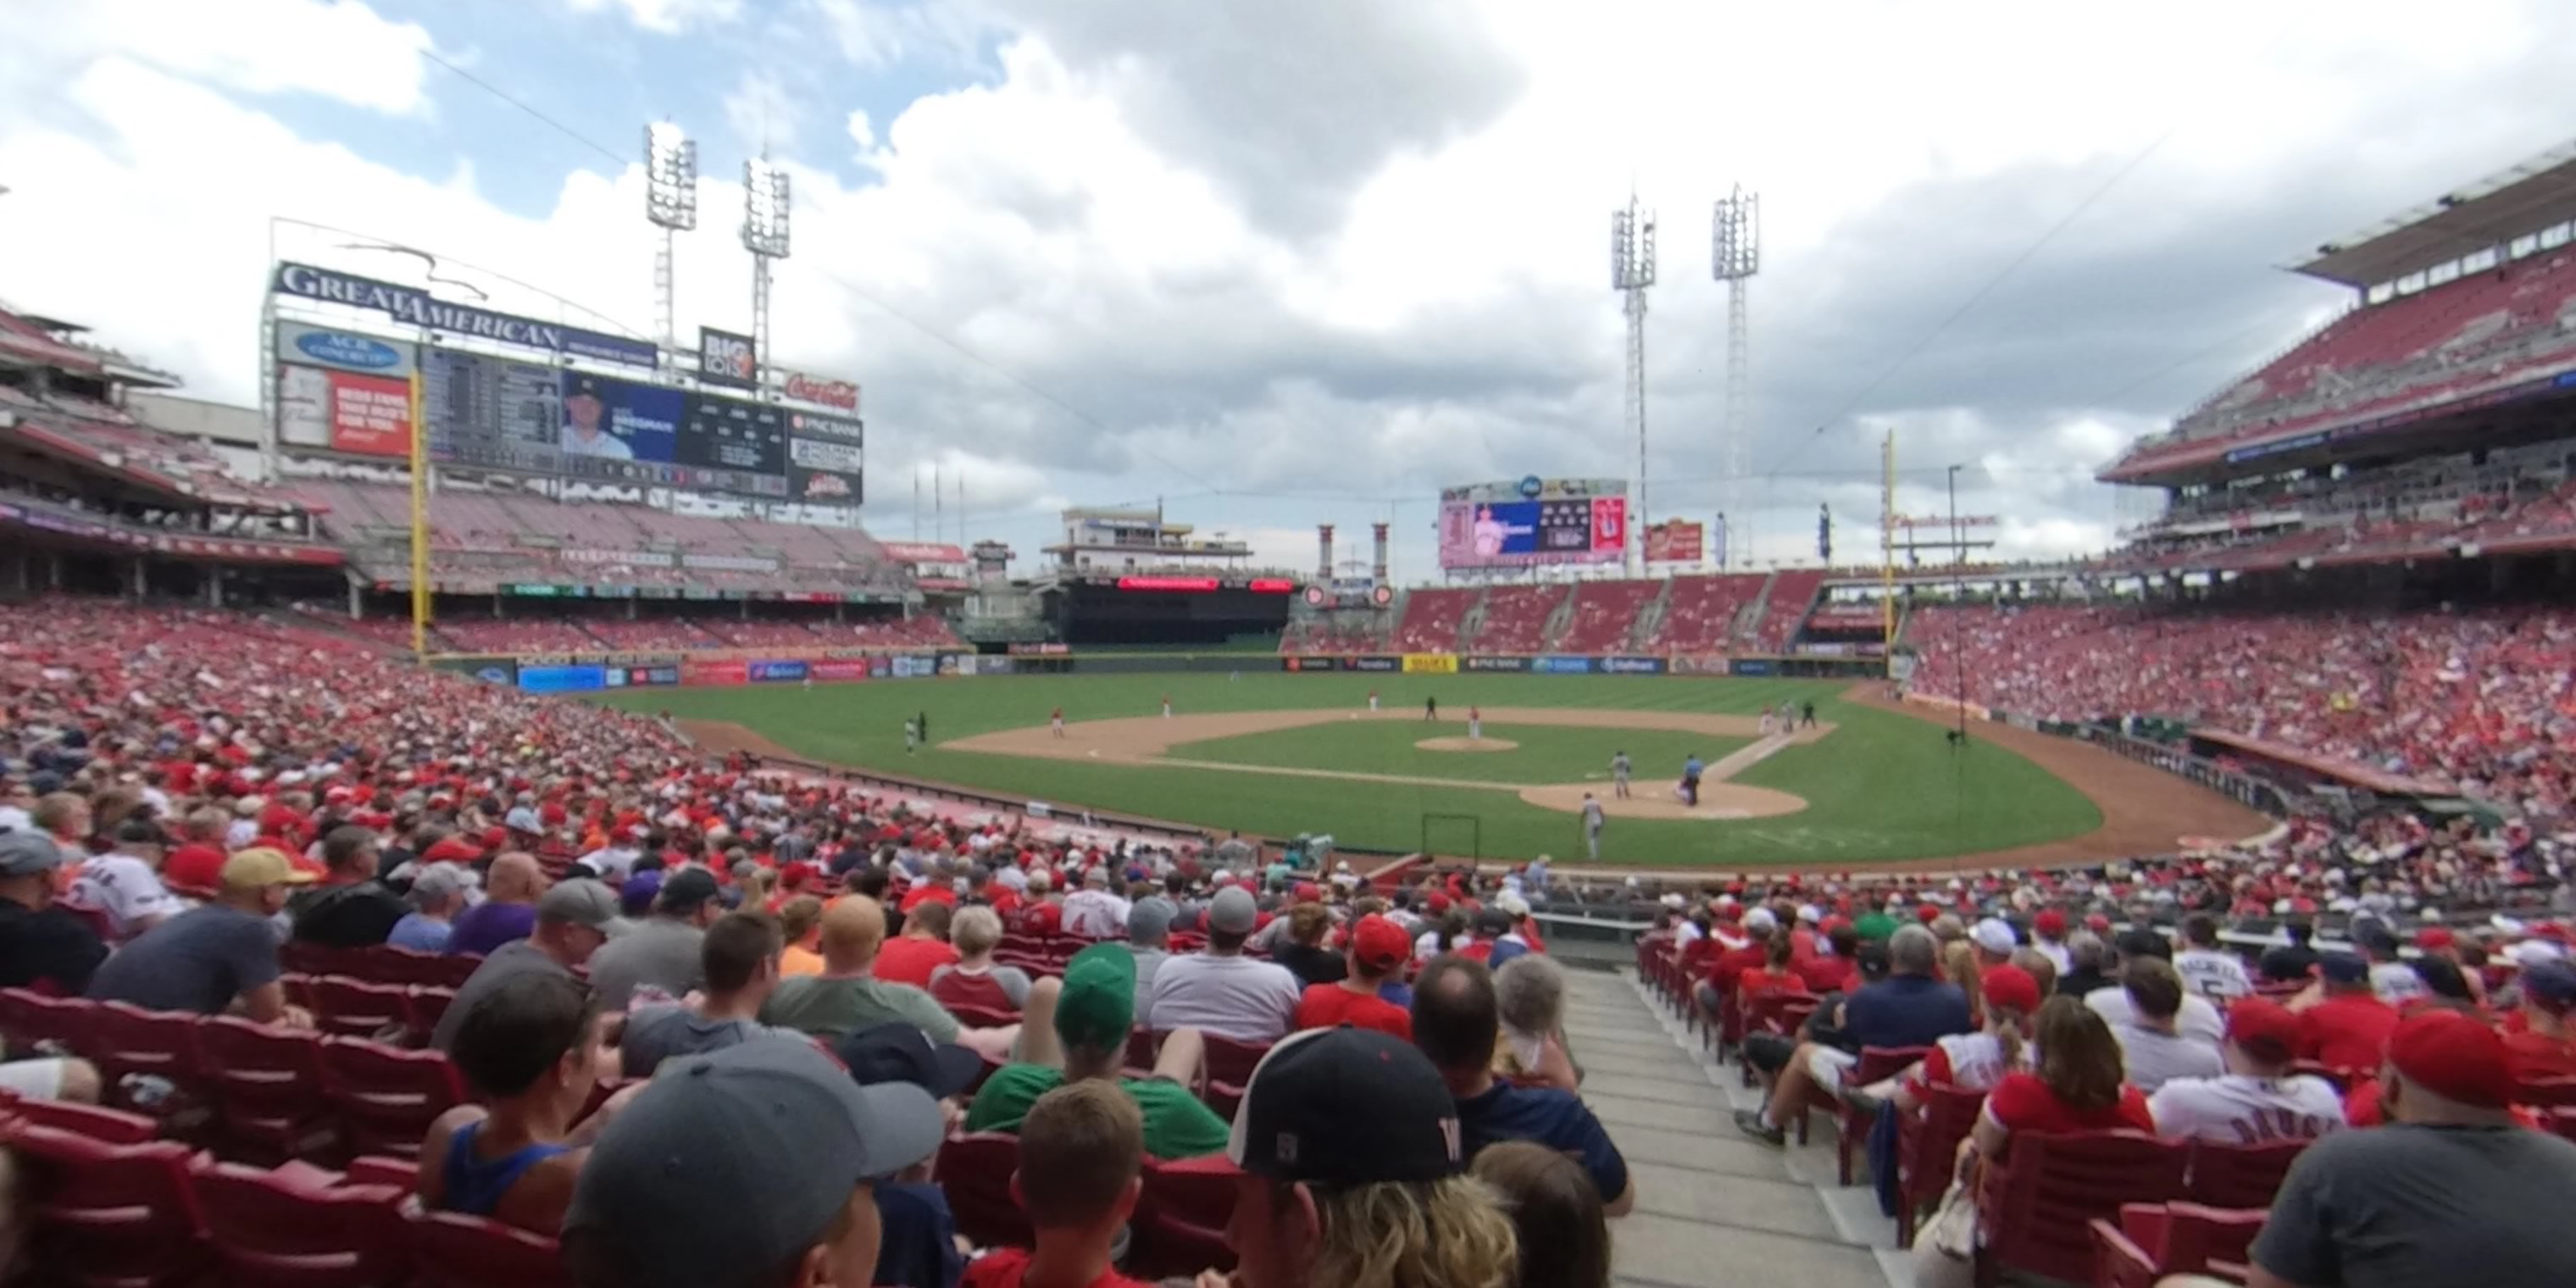 section 120 panoramic seat view  for baseball - great american ball park